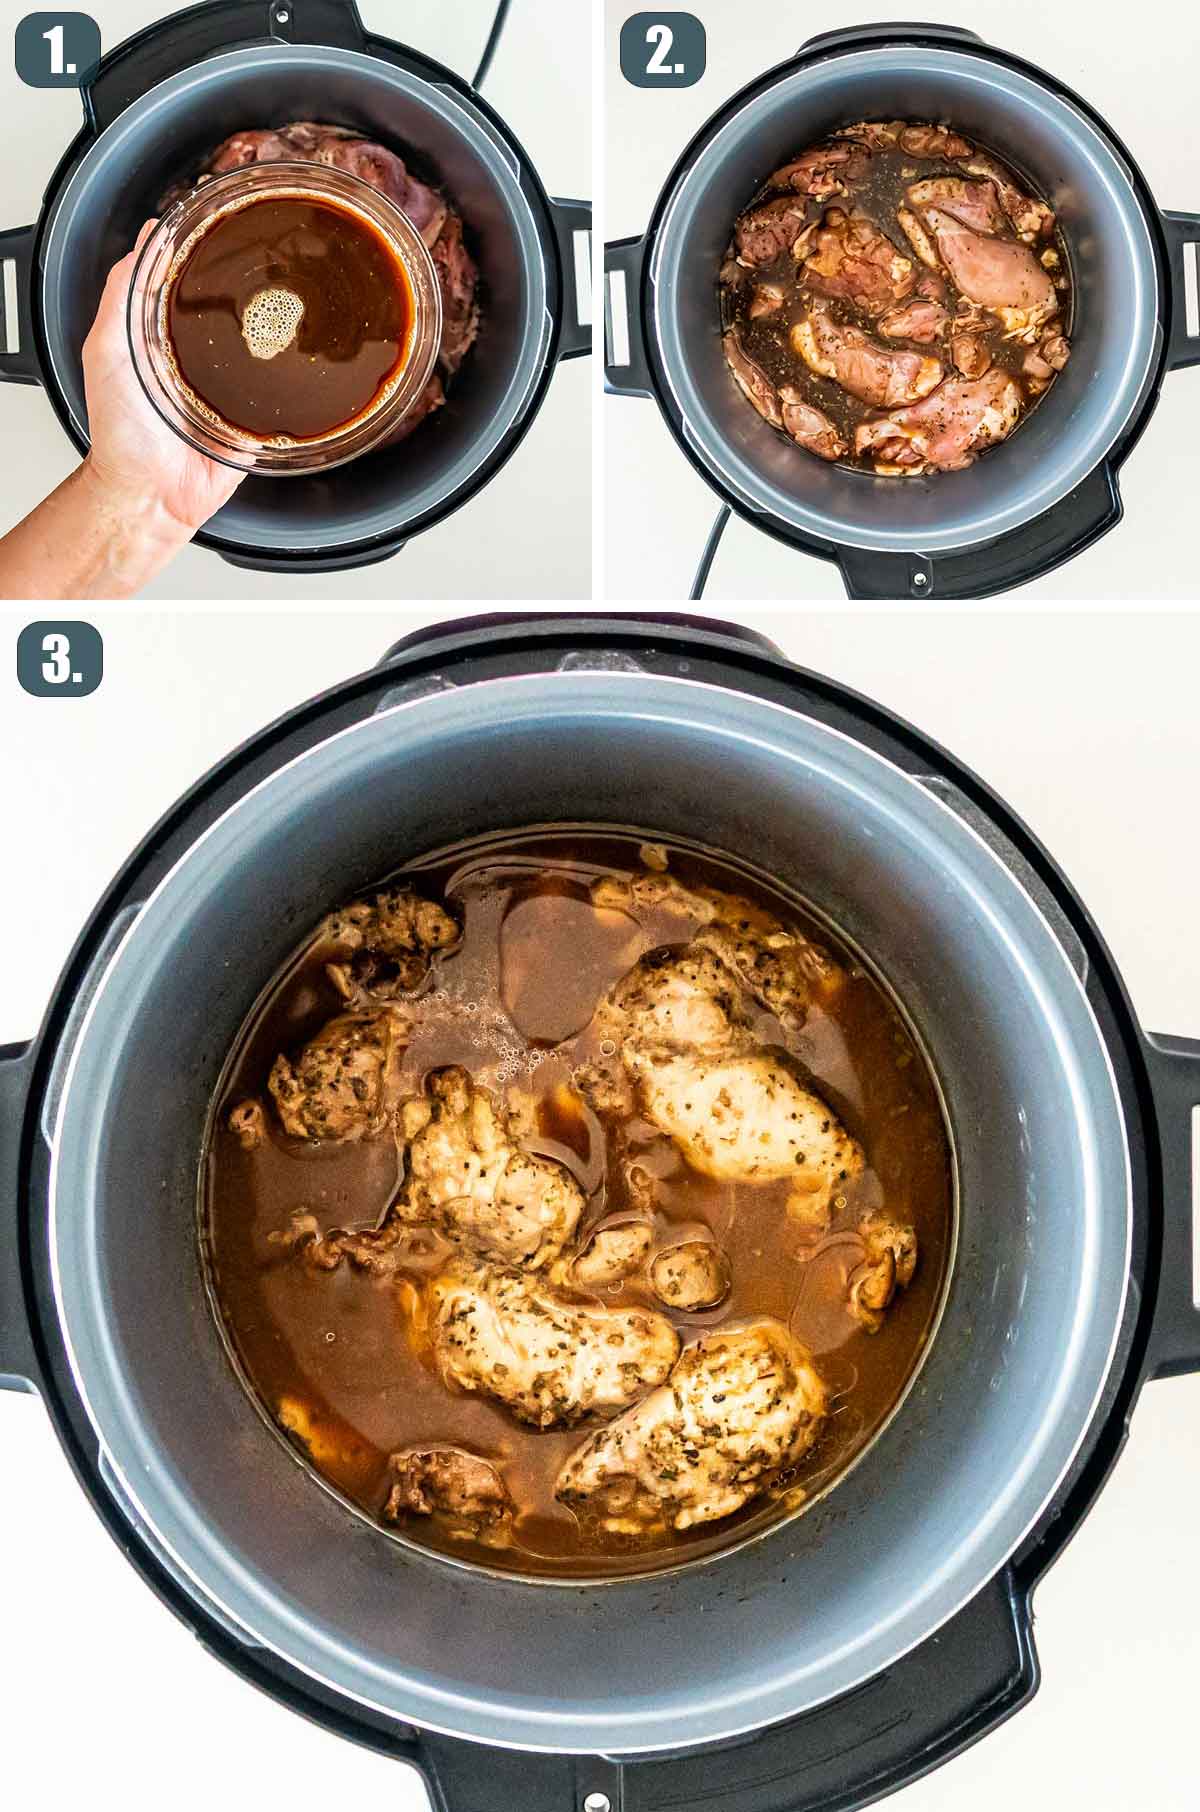 process shots showing how to make brown sugar pulled pork.